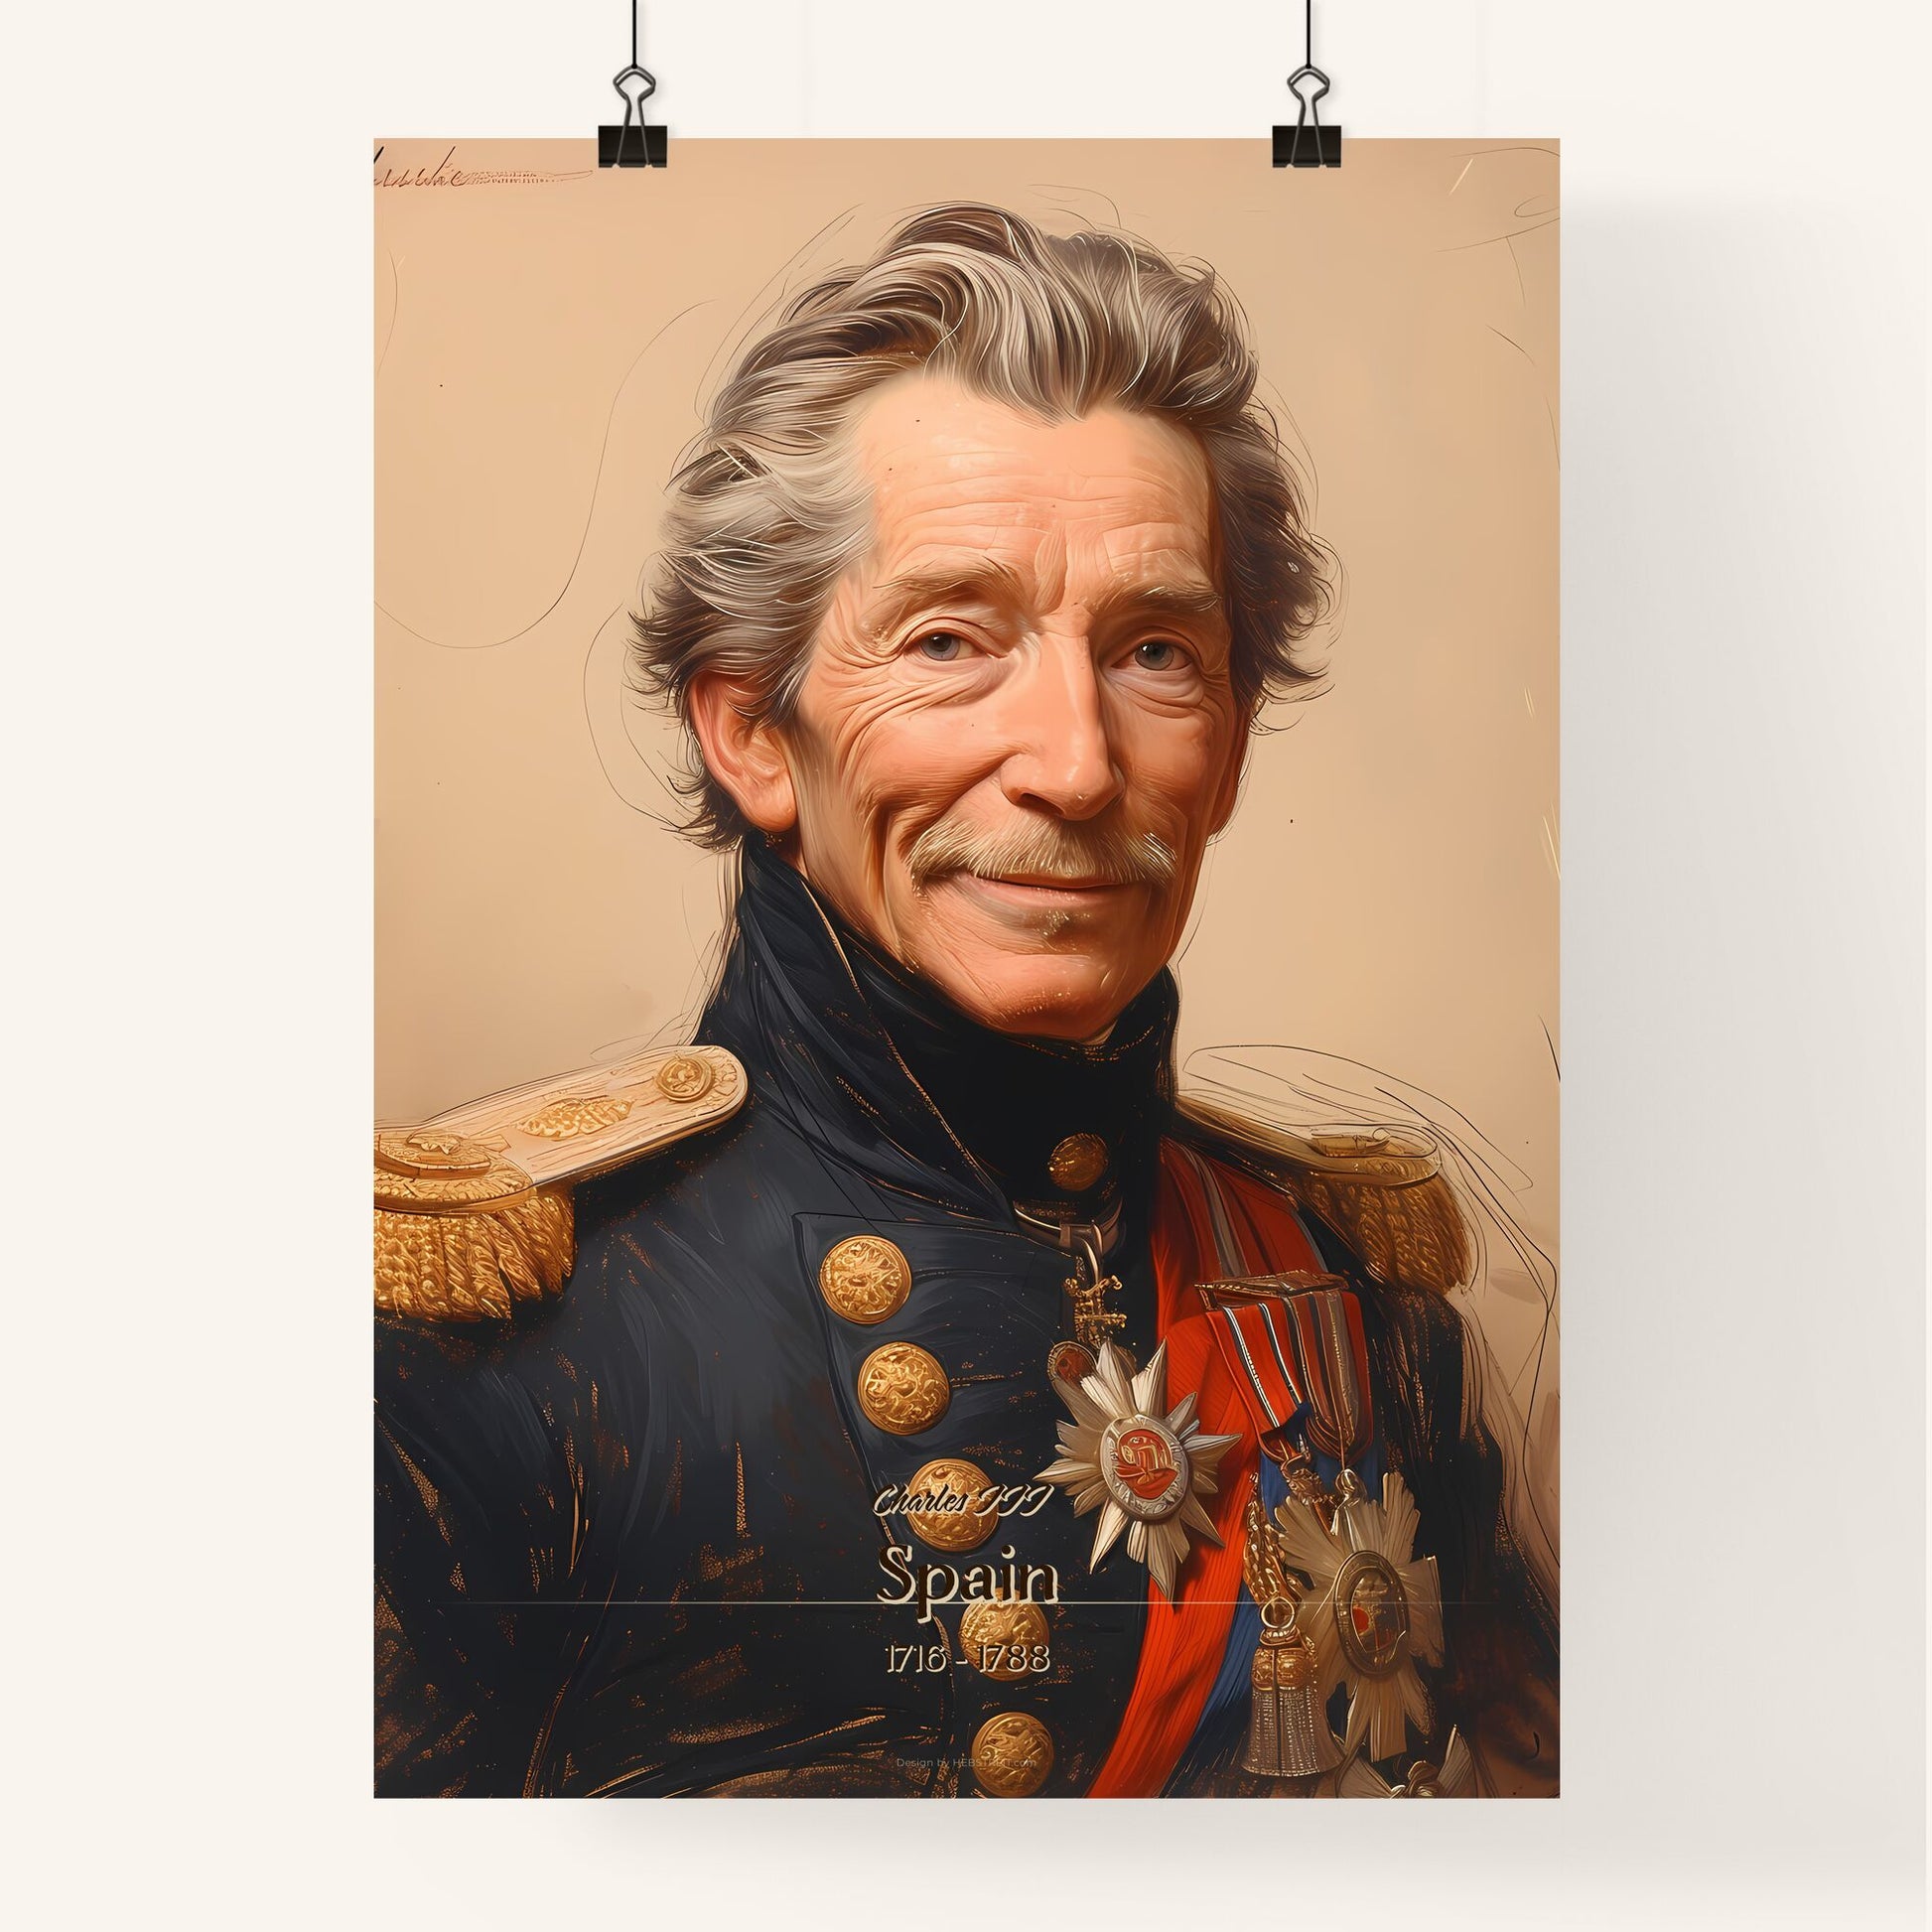 Charles III, Spain, 1716 - 1788, A Poster of a man in a military uniform Default Title